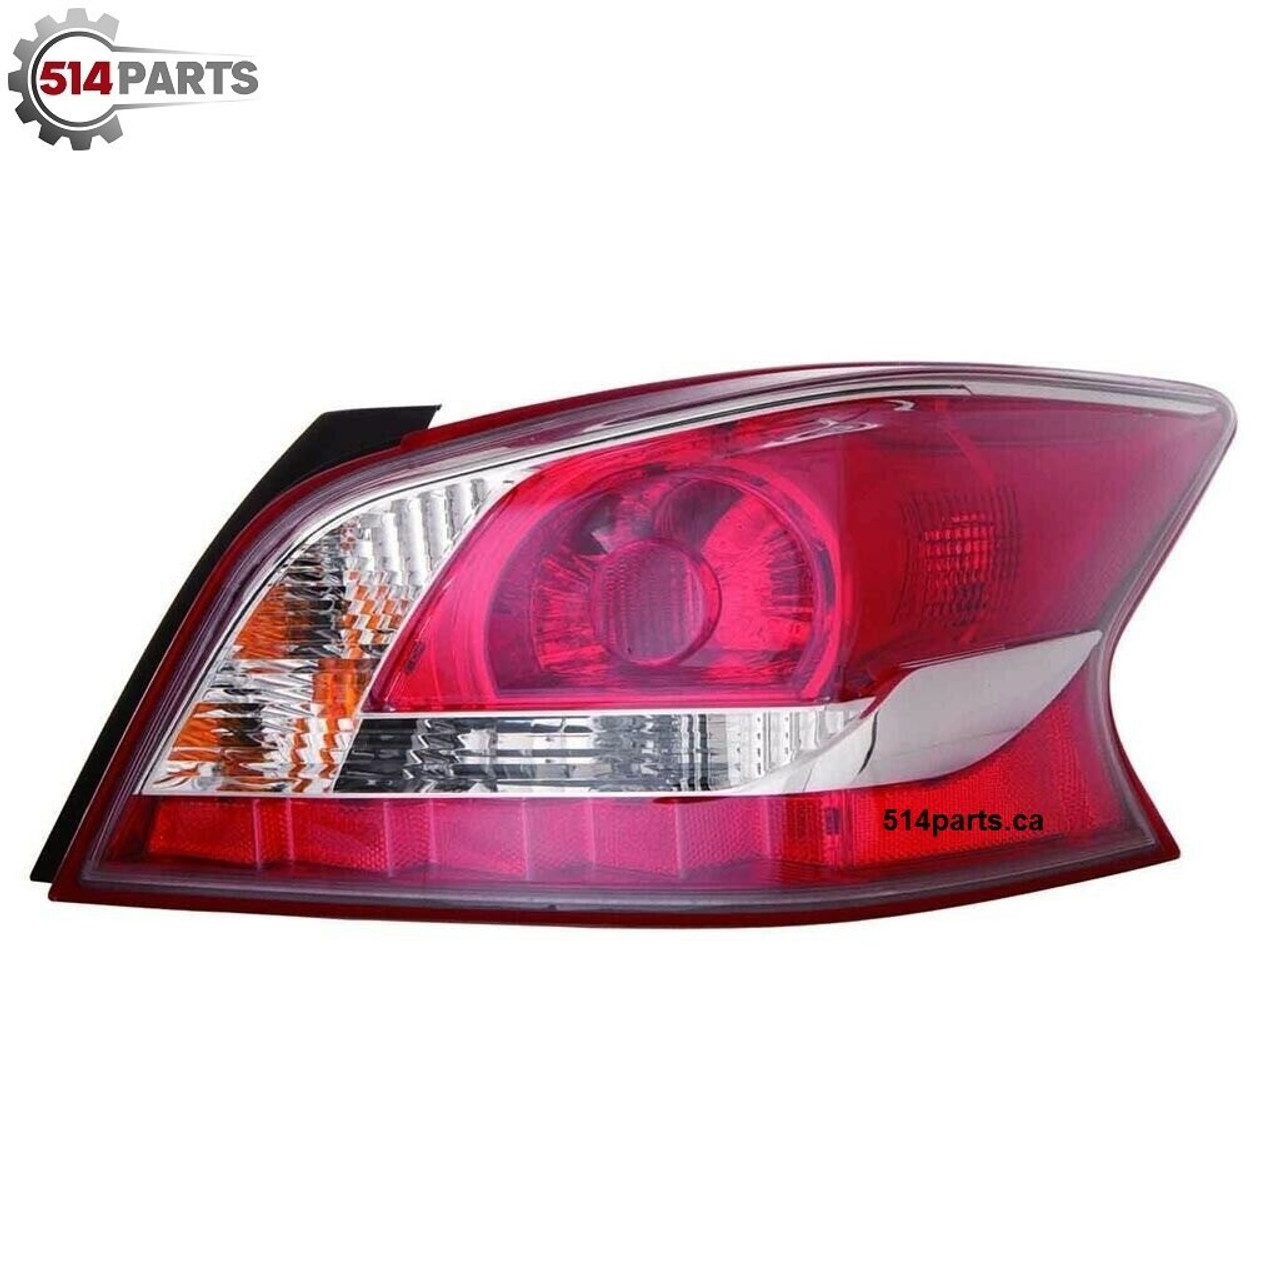 2015 NISSAN ALTIMA without LED TAIL LIGHTS - PHARES ARRIERE sans LED